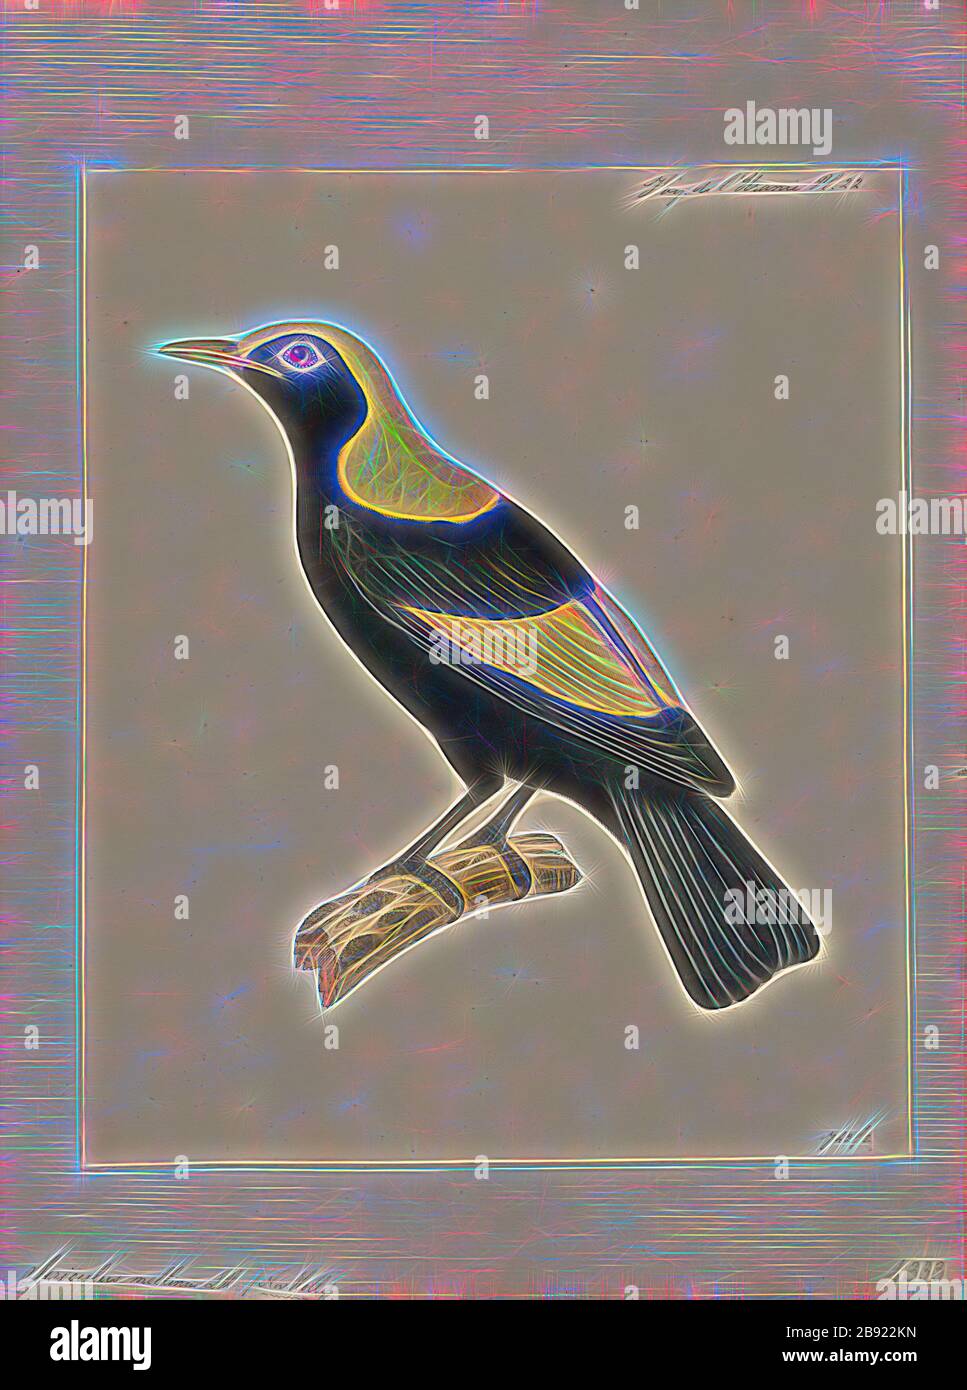 Sericulus melinus, Print, The genus Sericulus of the family Ptilonorhynchidae consists of three spectacularly colored bowerbirds., 1824-1839, Reimagined by Gibon, design of warm cheerful glowing of brightness and light rays radiance. Classic art reinvented with a modern twist. Photography inspired by futurism, embracing dynamic energy of modern technology, movement, speed and revolutionize culture. Stock Photo